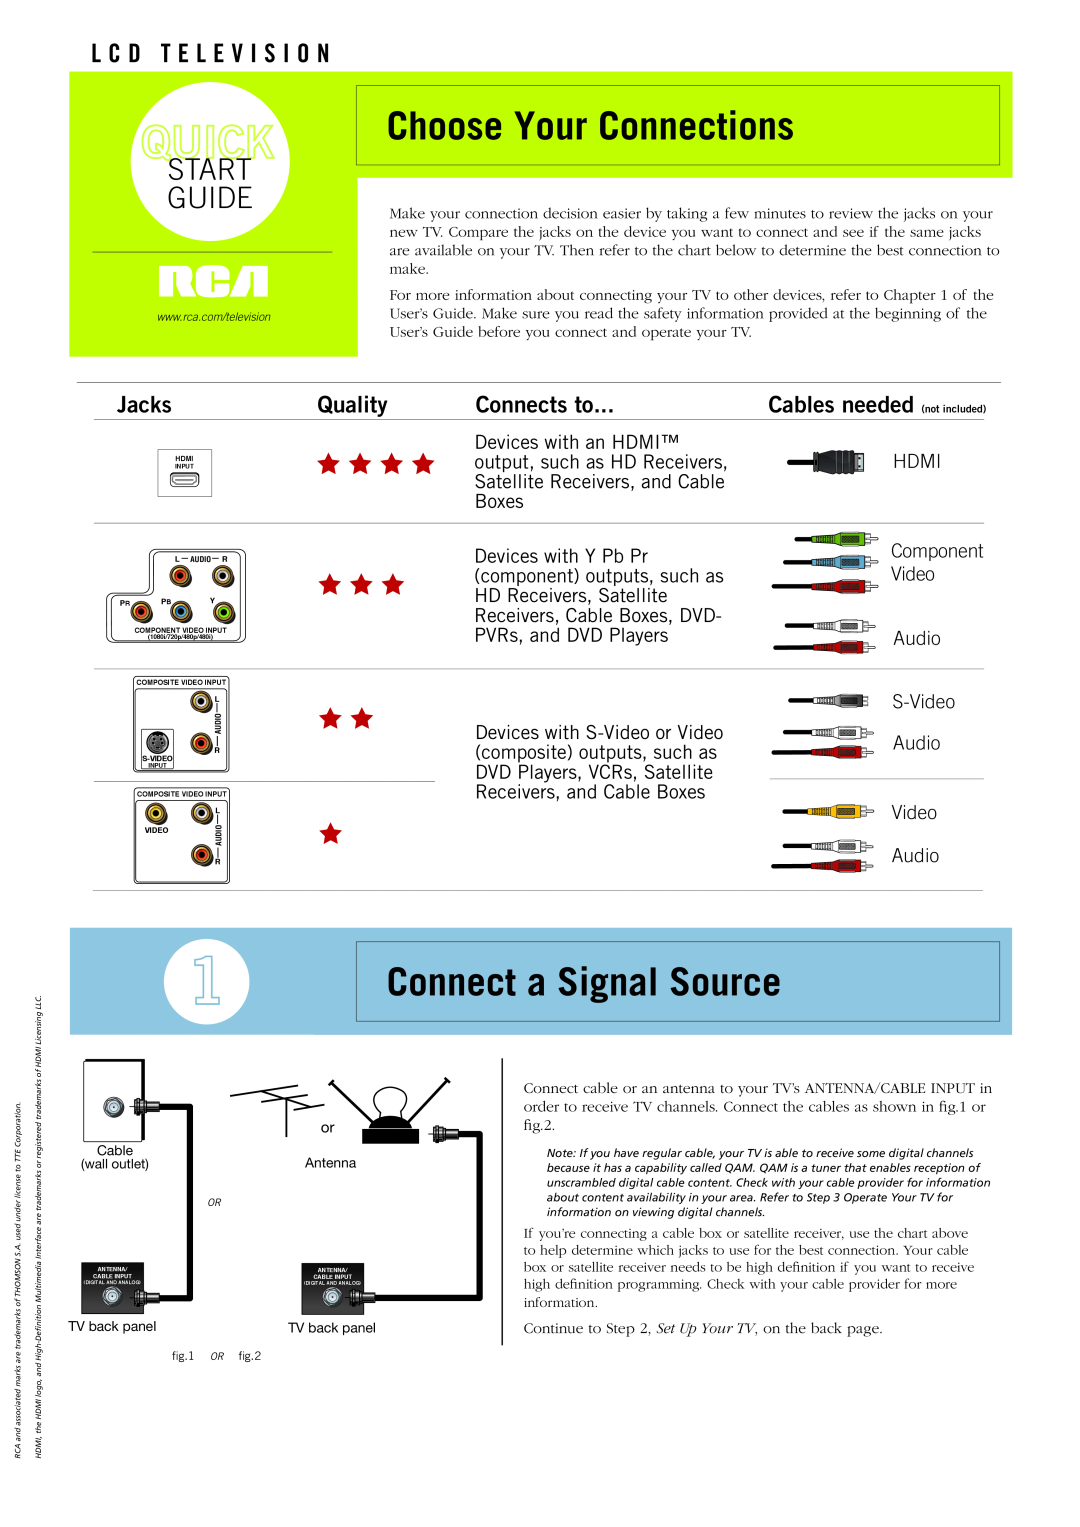 RCA L19WD20 manual Choose Your Connections, Connect a Signal Source, Start Guide, L C D T E L E V I S I O N, Jacks, Boxes 